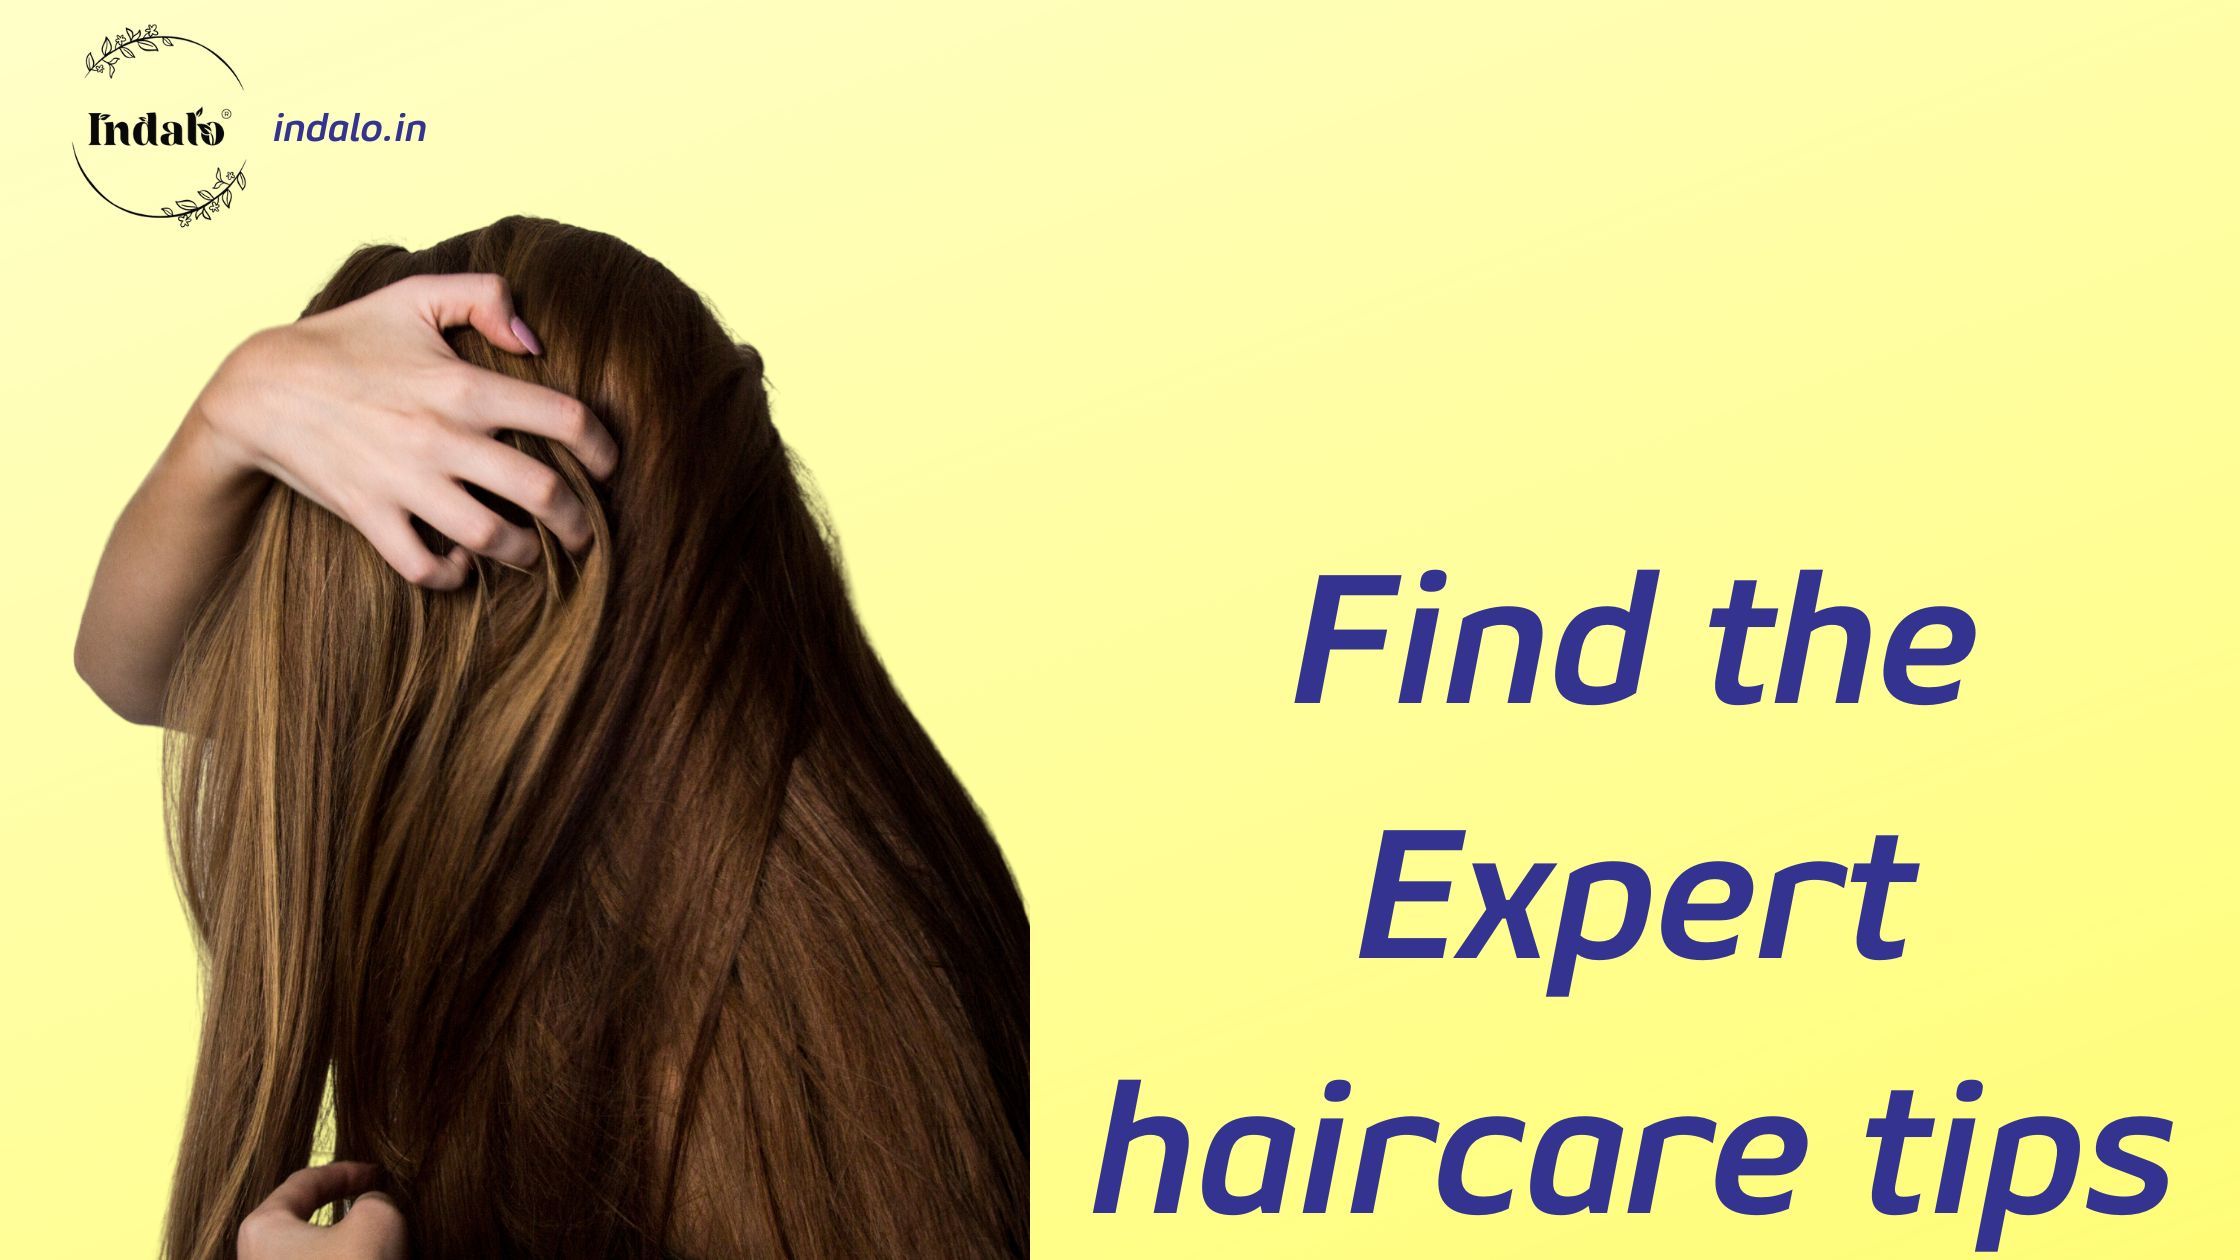 Find the Expert haircare tips